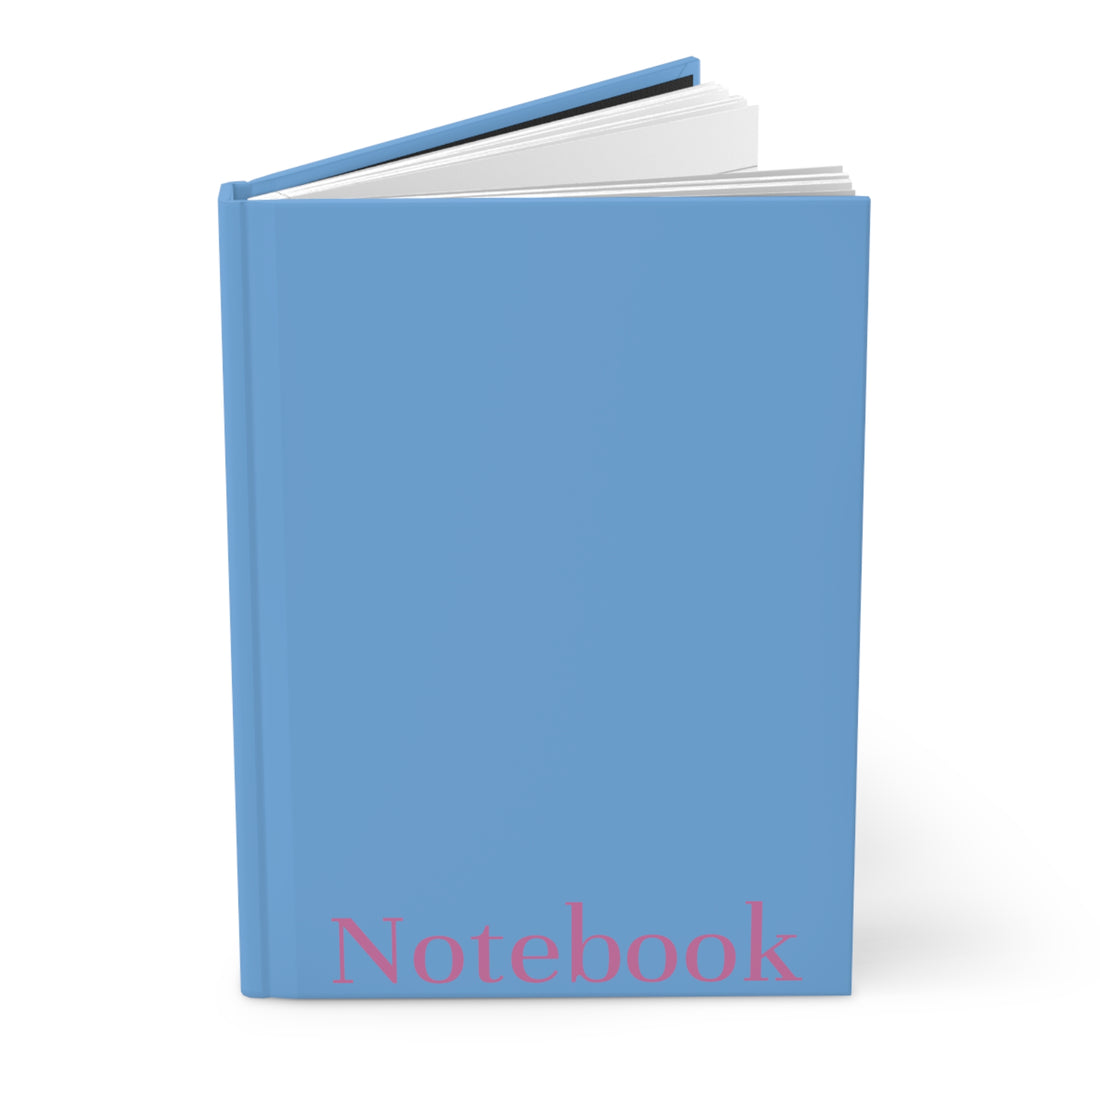 Blue and Pink Notebook, Matte Hardcover Journal